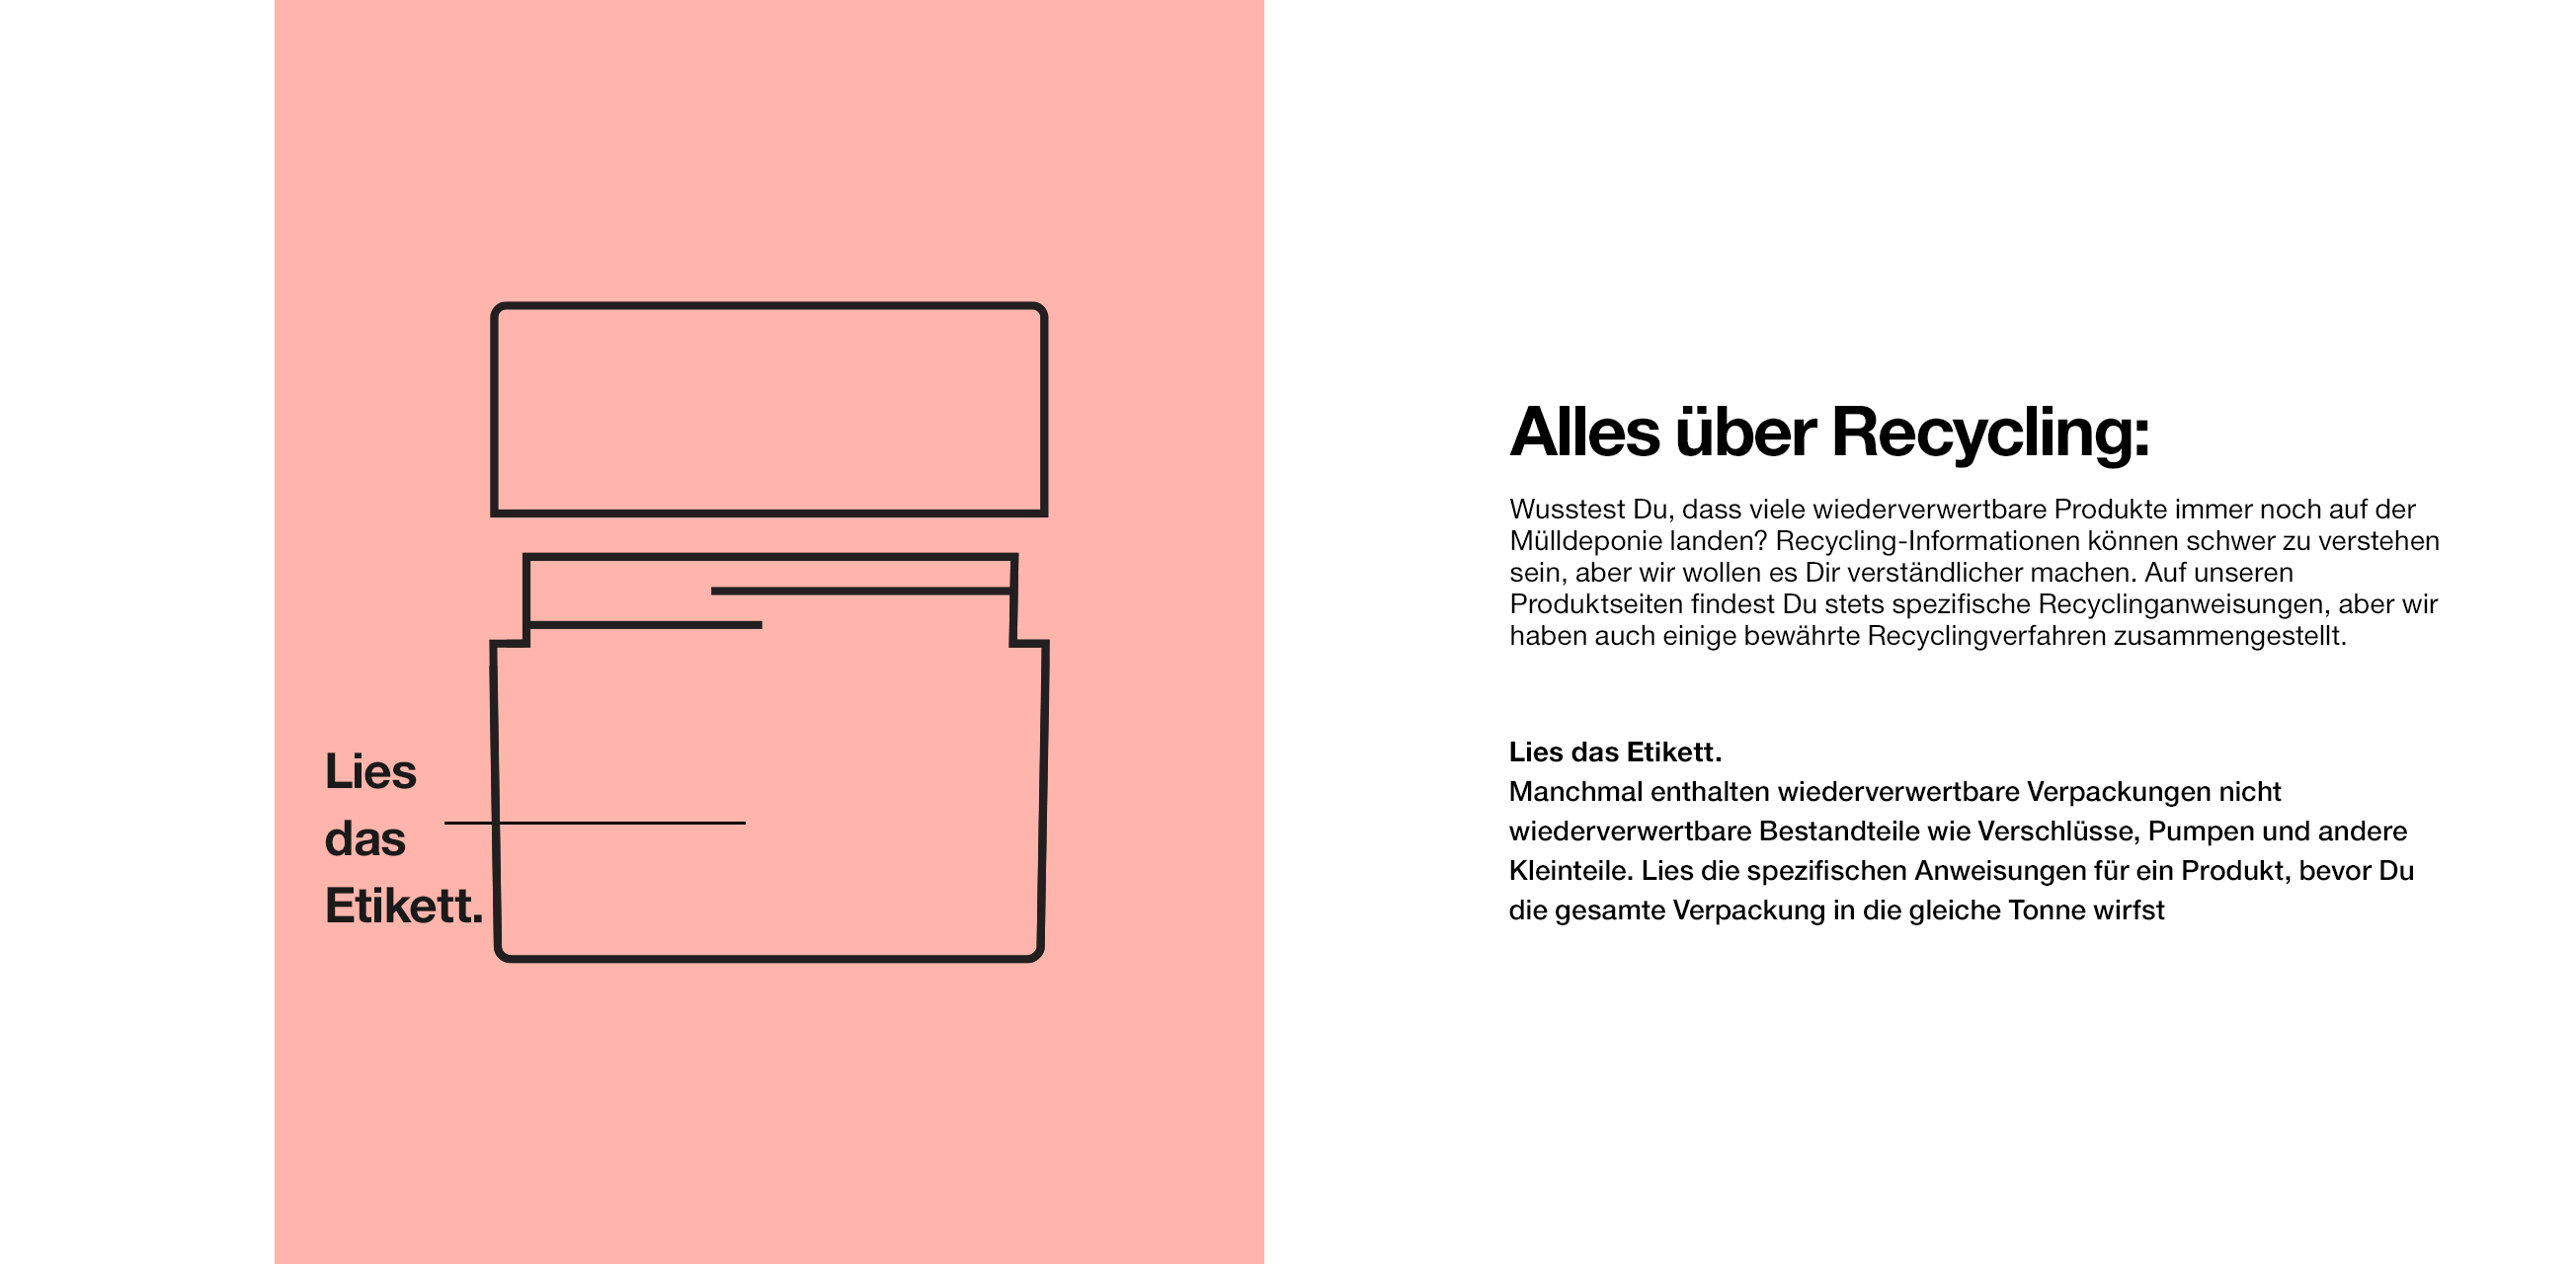 Alles über Recycling